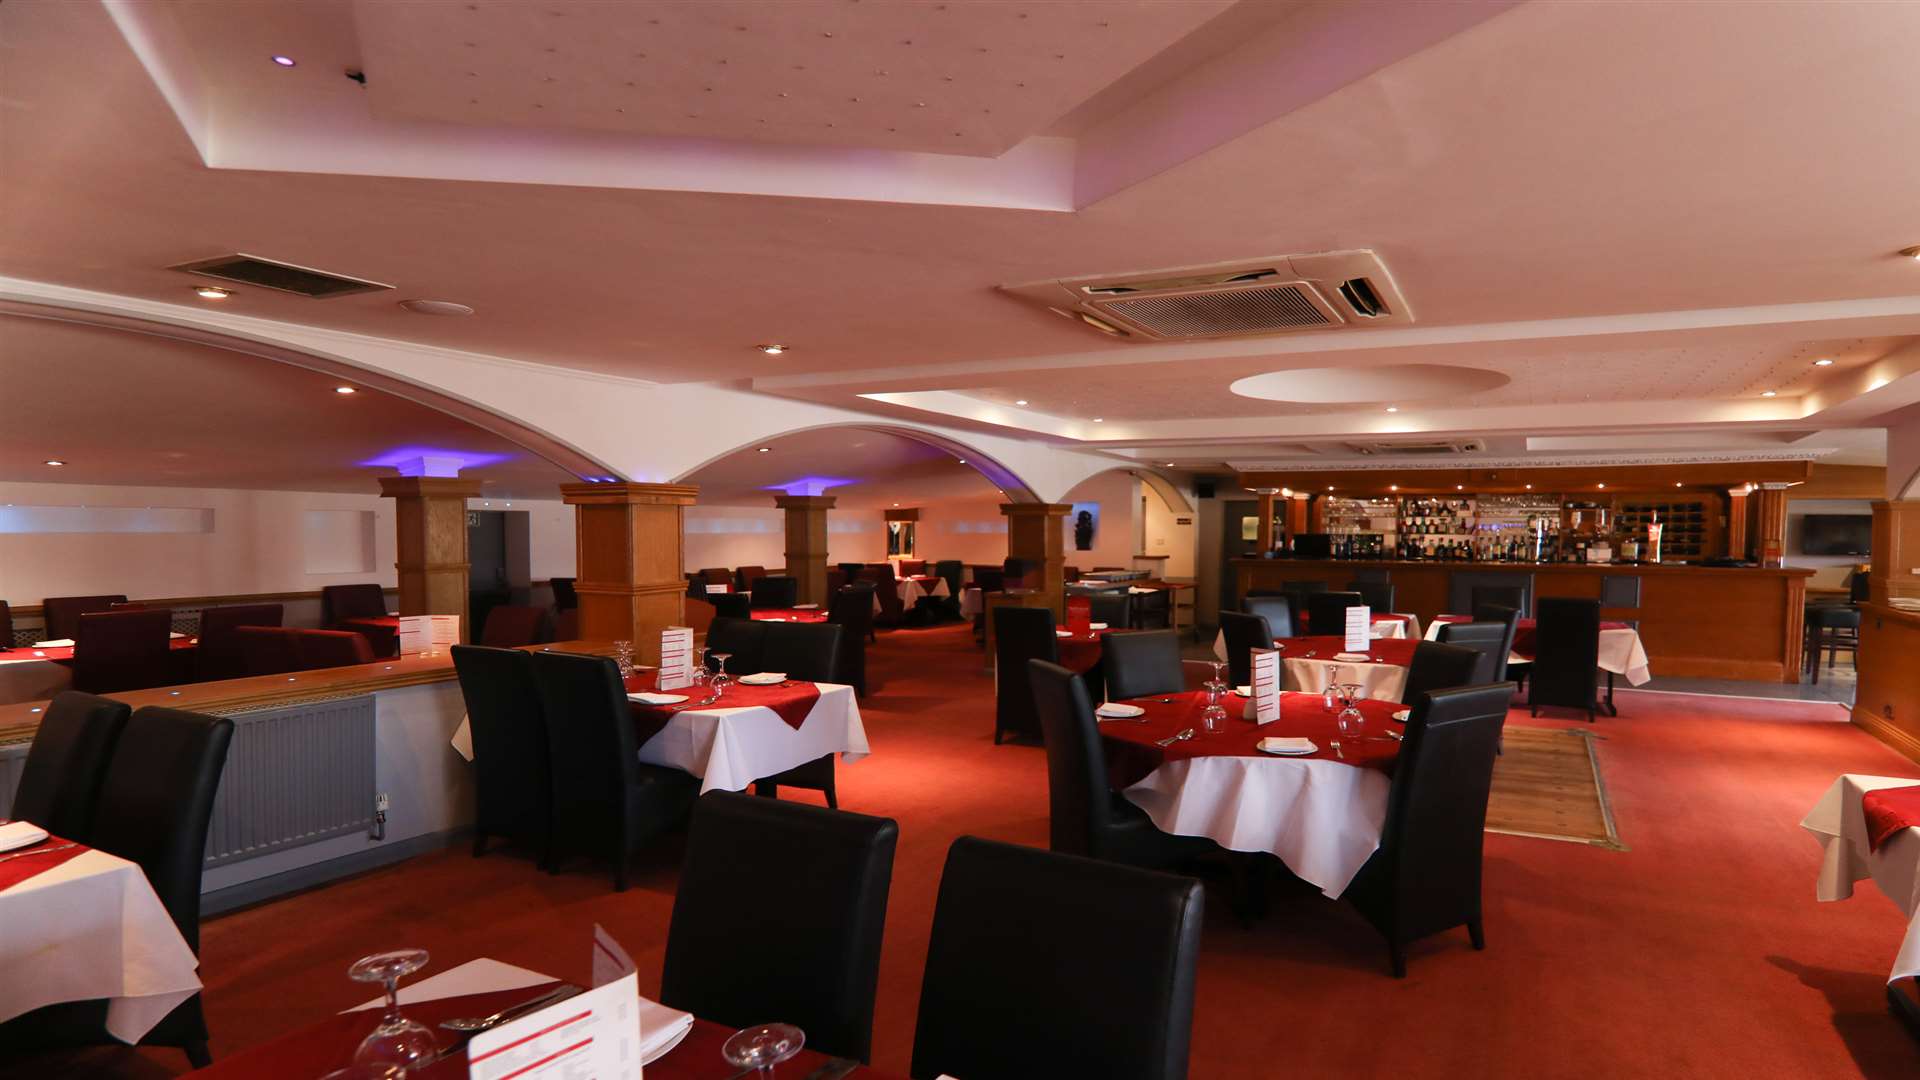 The Rajdani has been shortlisted in the Asian Restaurant Awards.